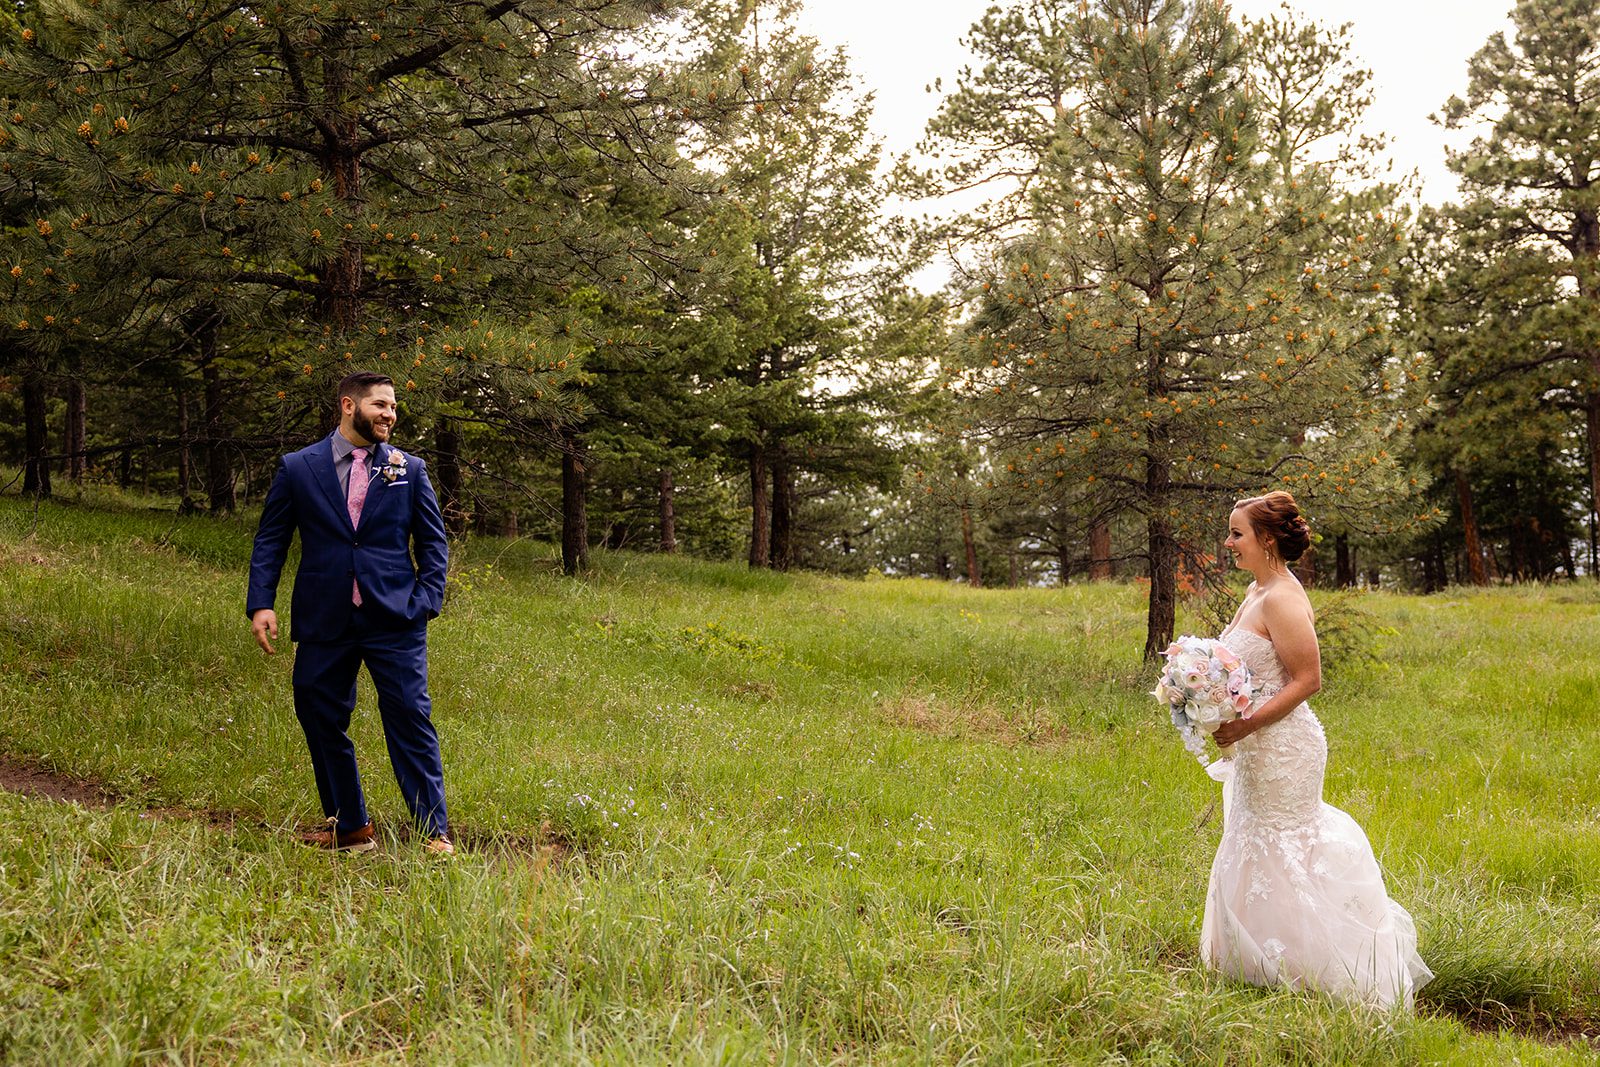 Groom turns to see his bride for their first look during their Boulder elopement with videography.